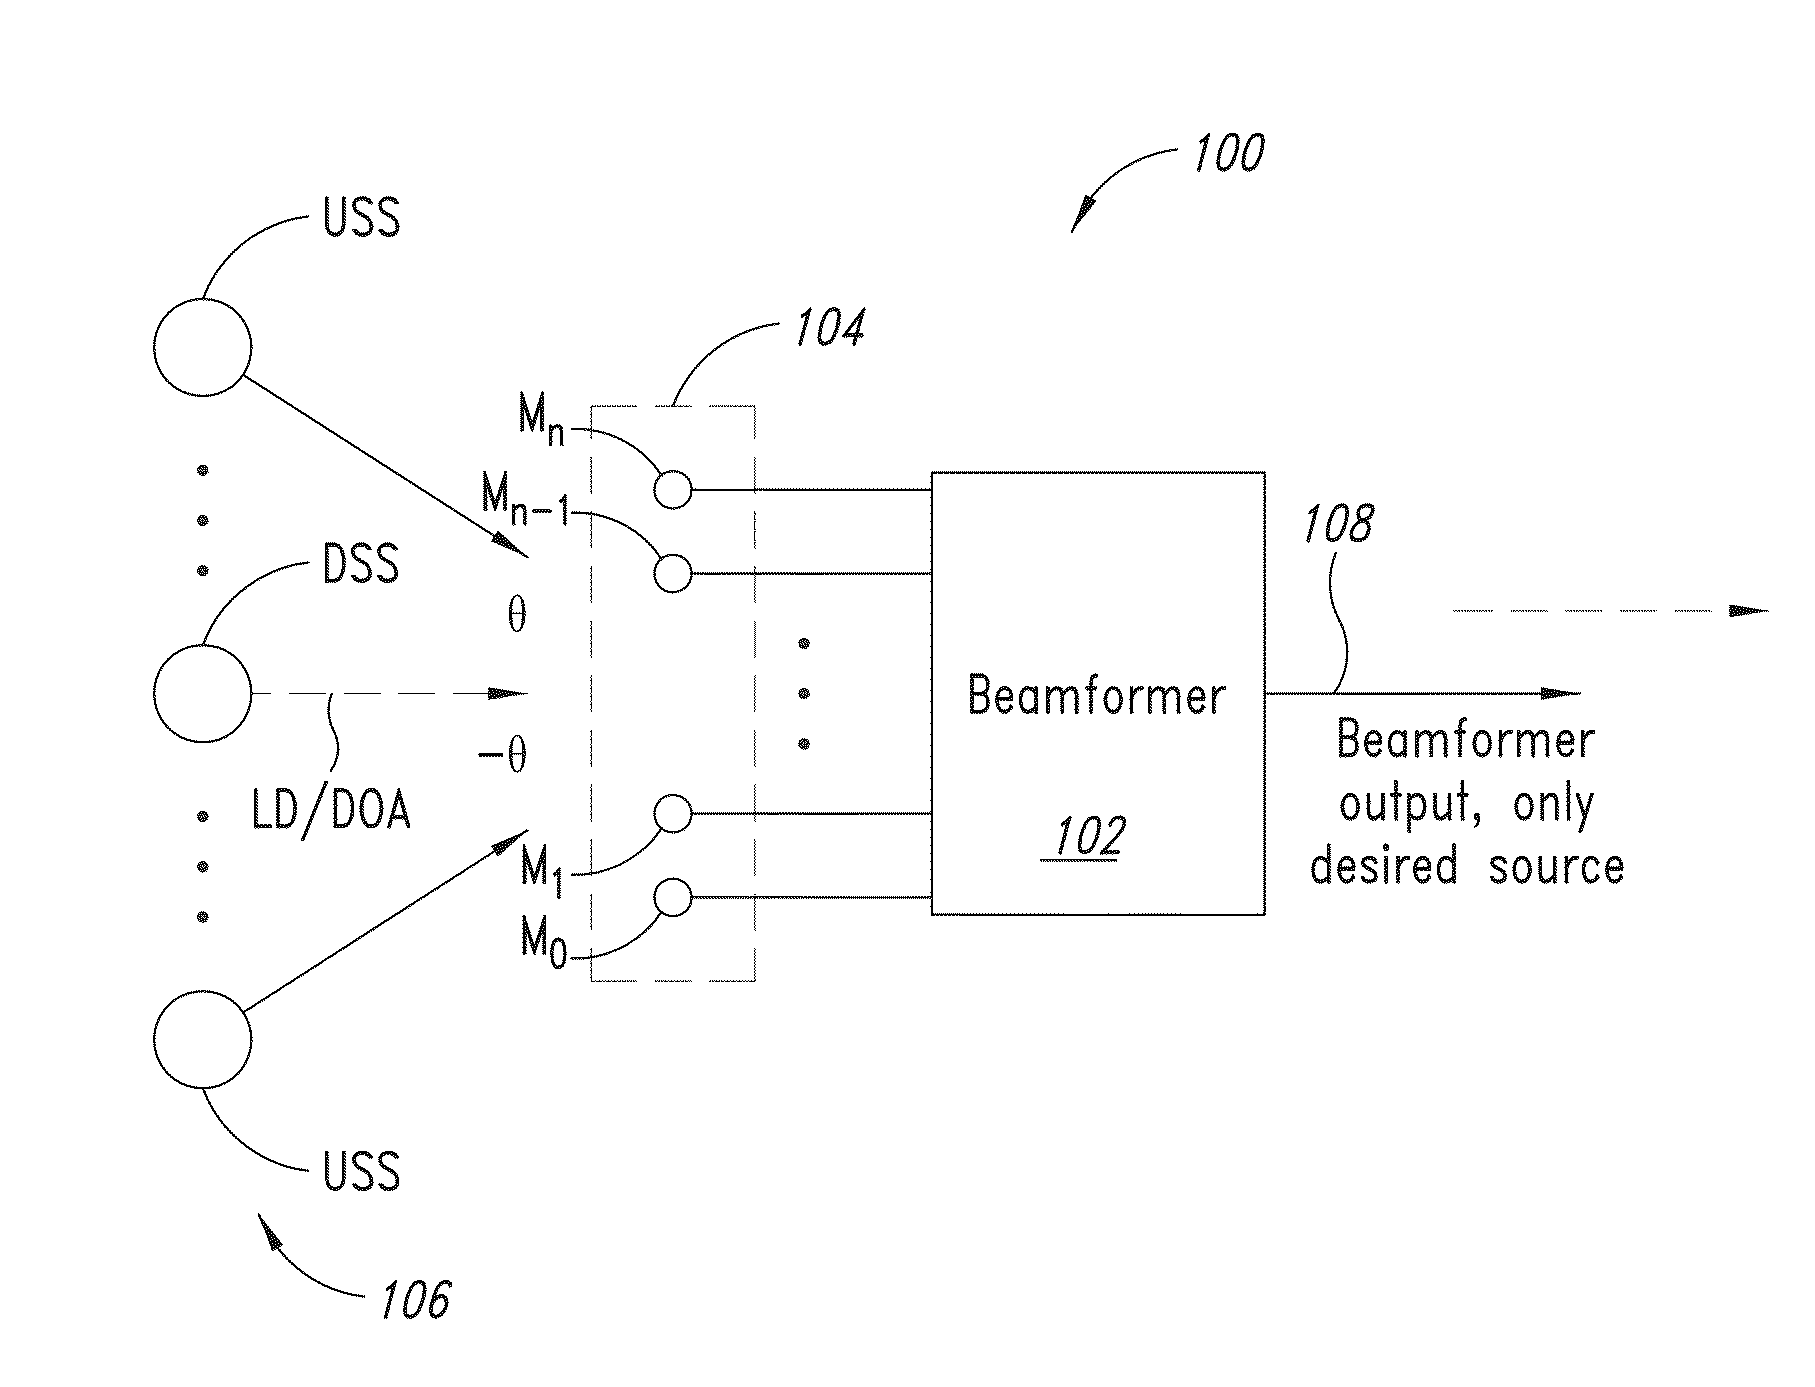 Steering vector estimation for minimum variance distortionless response (MVDR) beamforming circuits, systems, and methods